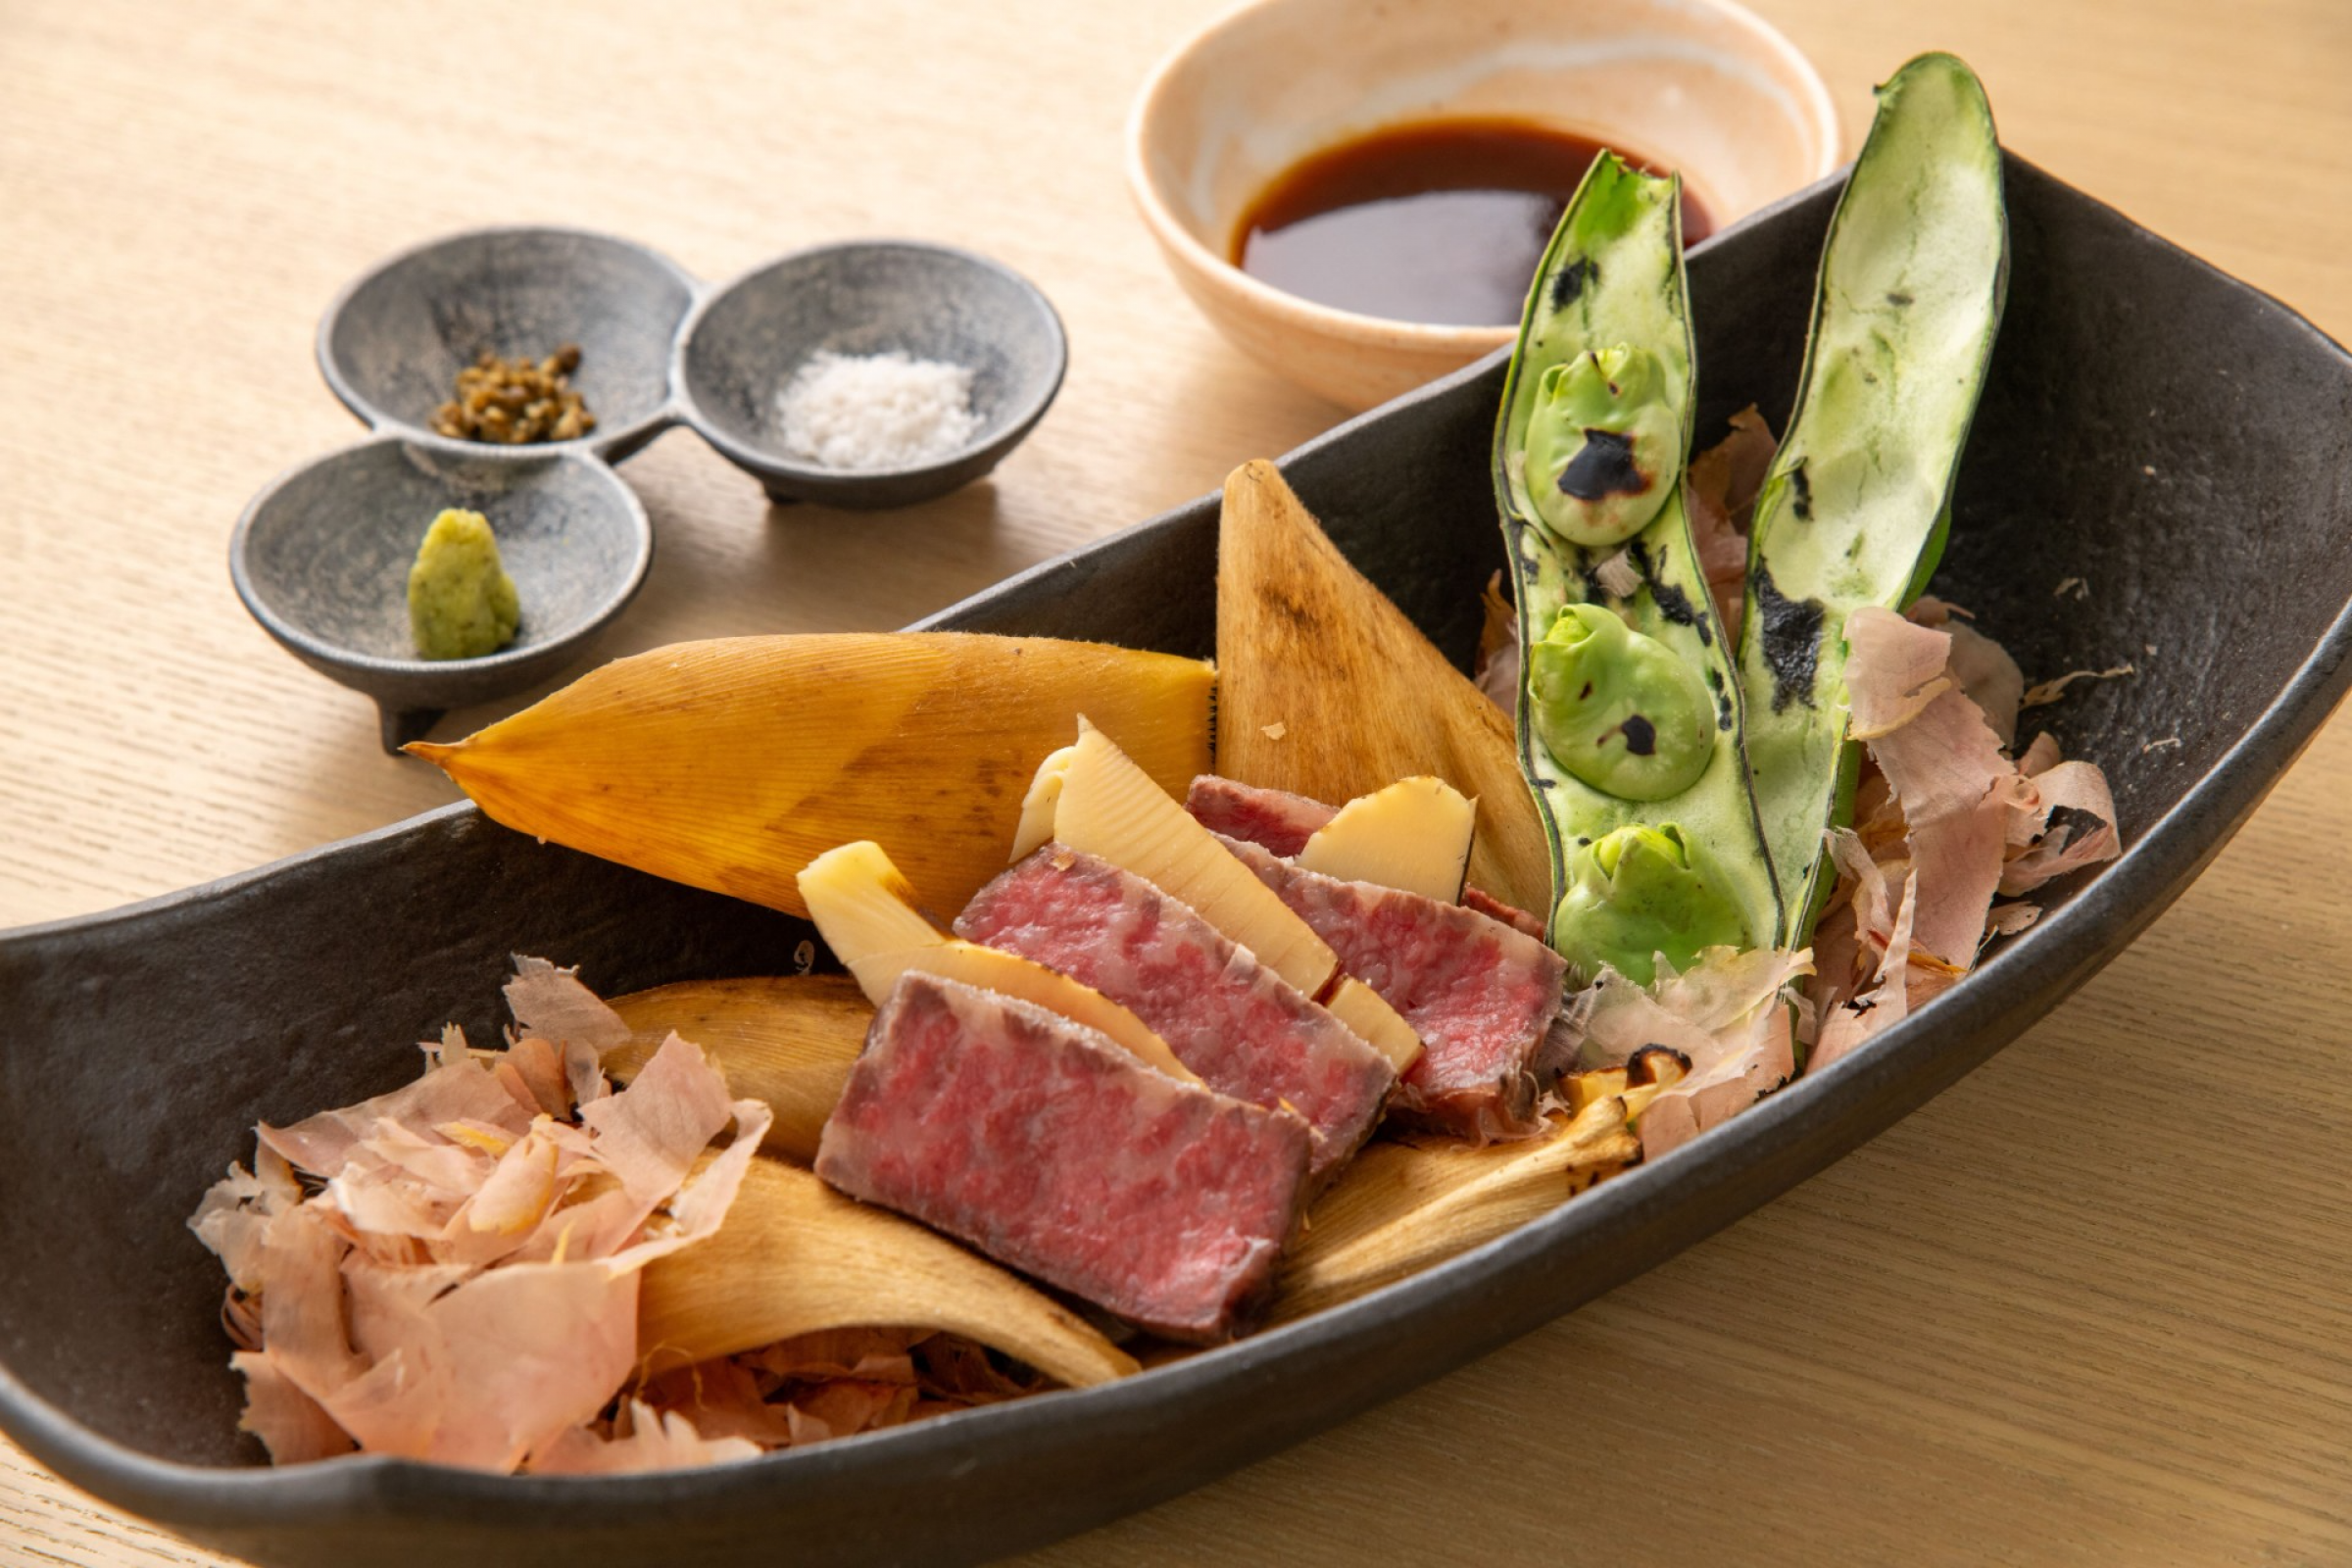 Chargrilled Nasu “GOTOGYU” Beef Sirloin, Spring Bamboo Shoot and Green Soy Bean, Selected Japanese Condiments